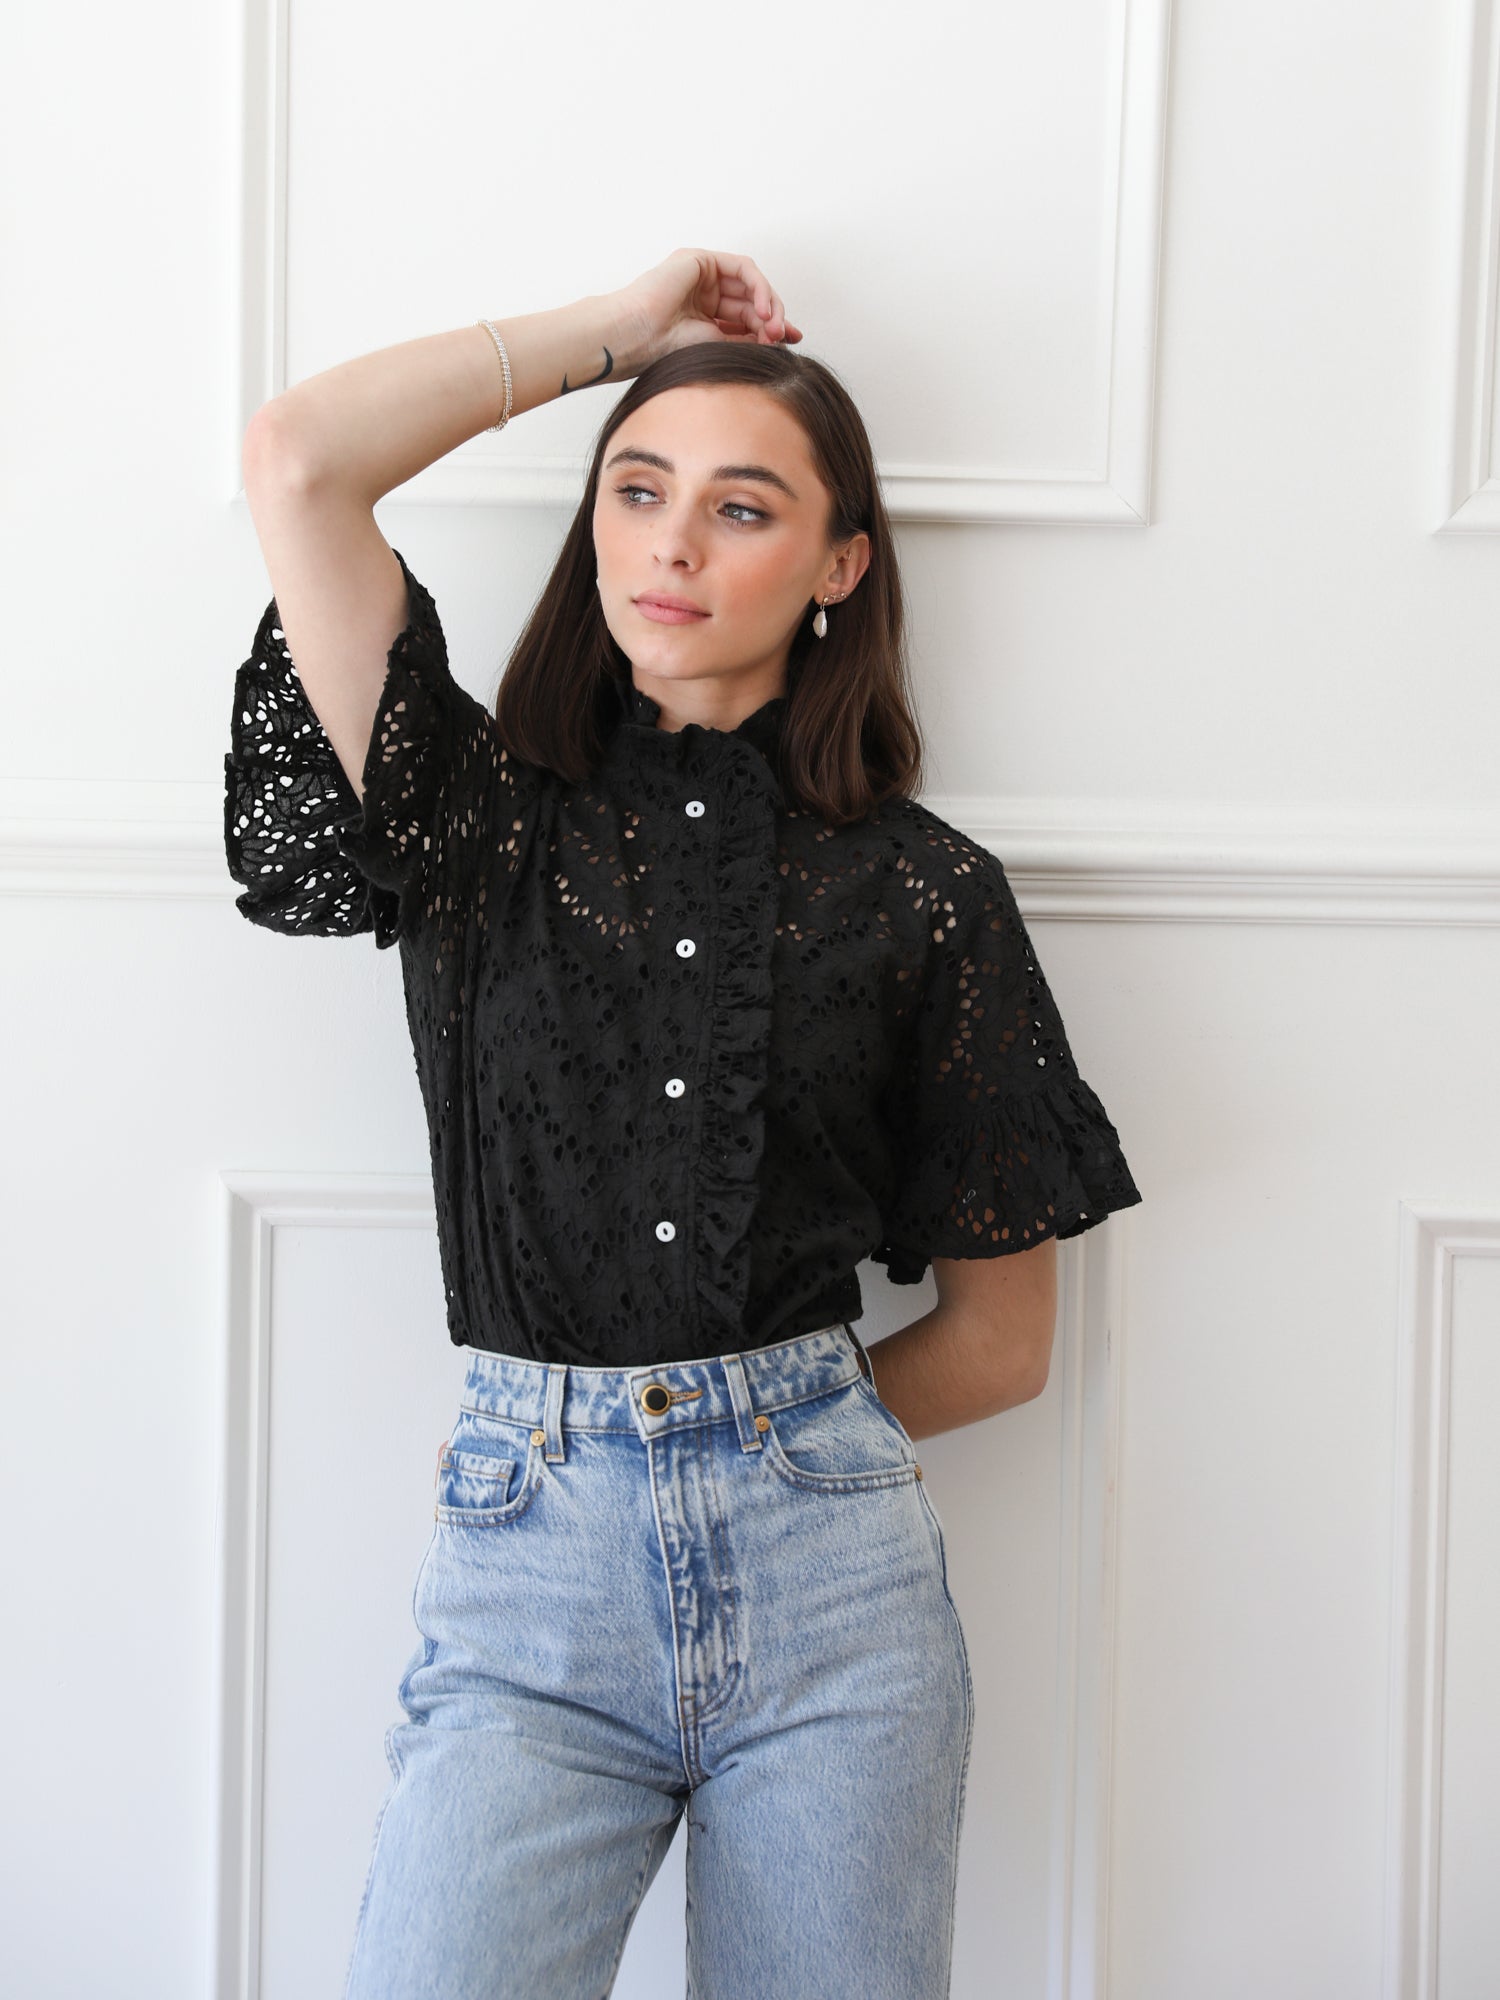 MILLE Clothing Vanessa Top in Black Floral Eyelet